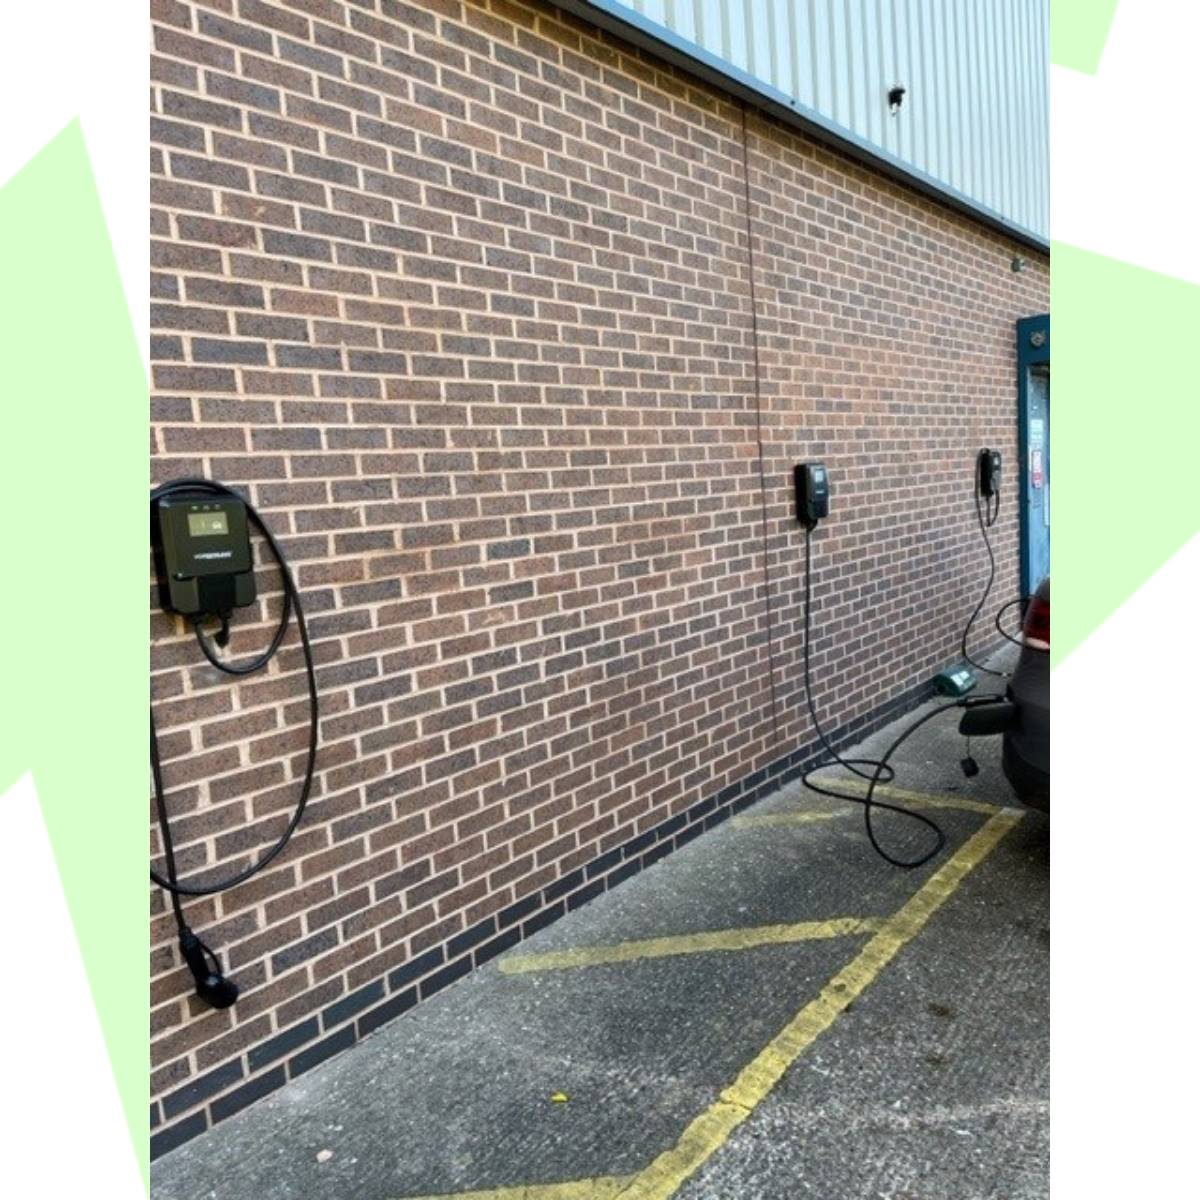 Brick Wall, Parking Spaces with Electric Car Chargers